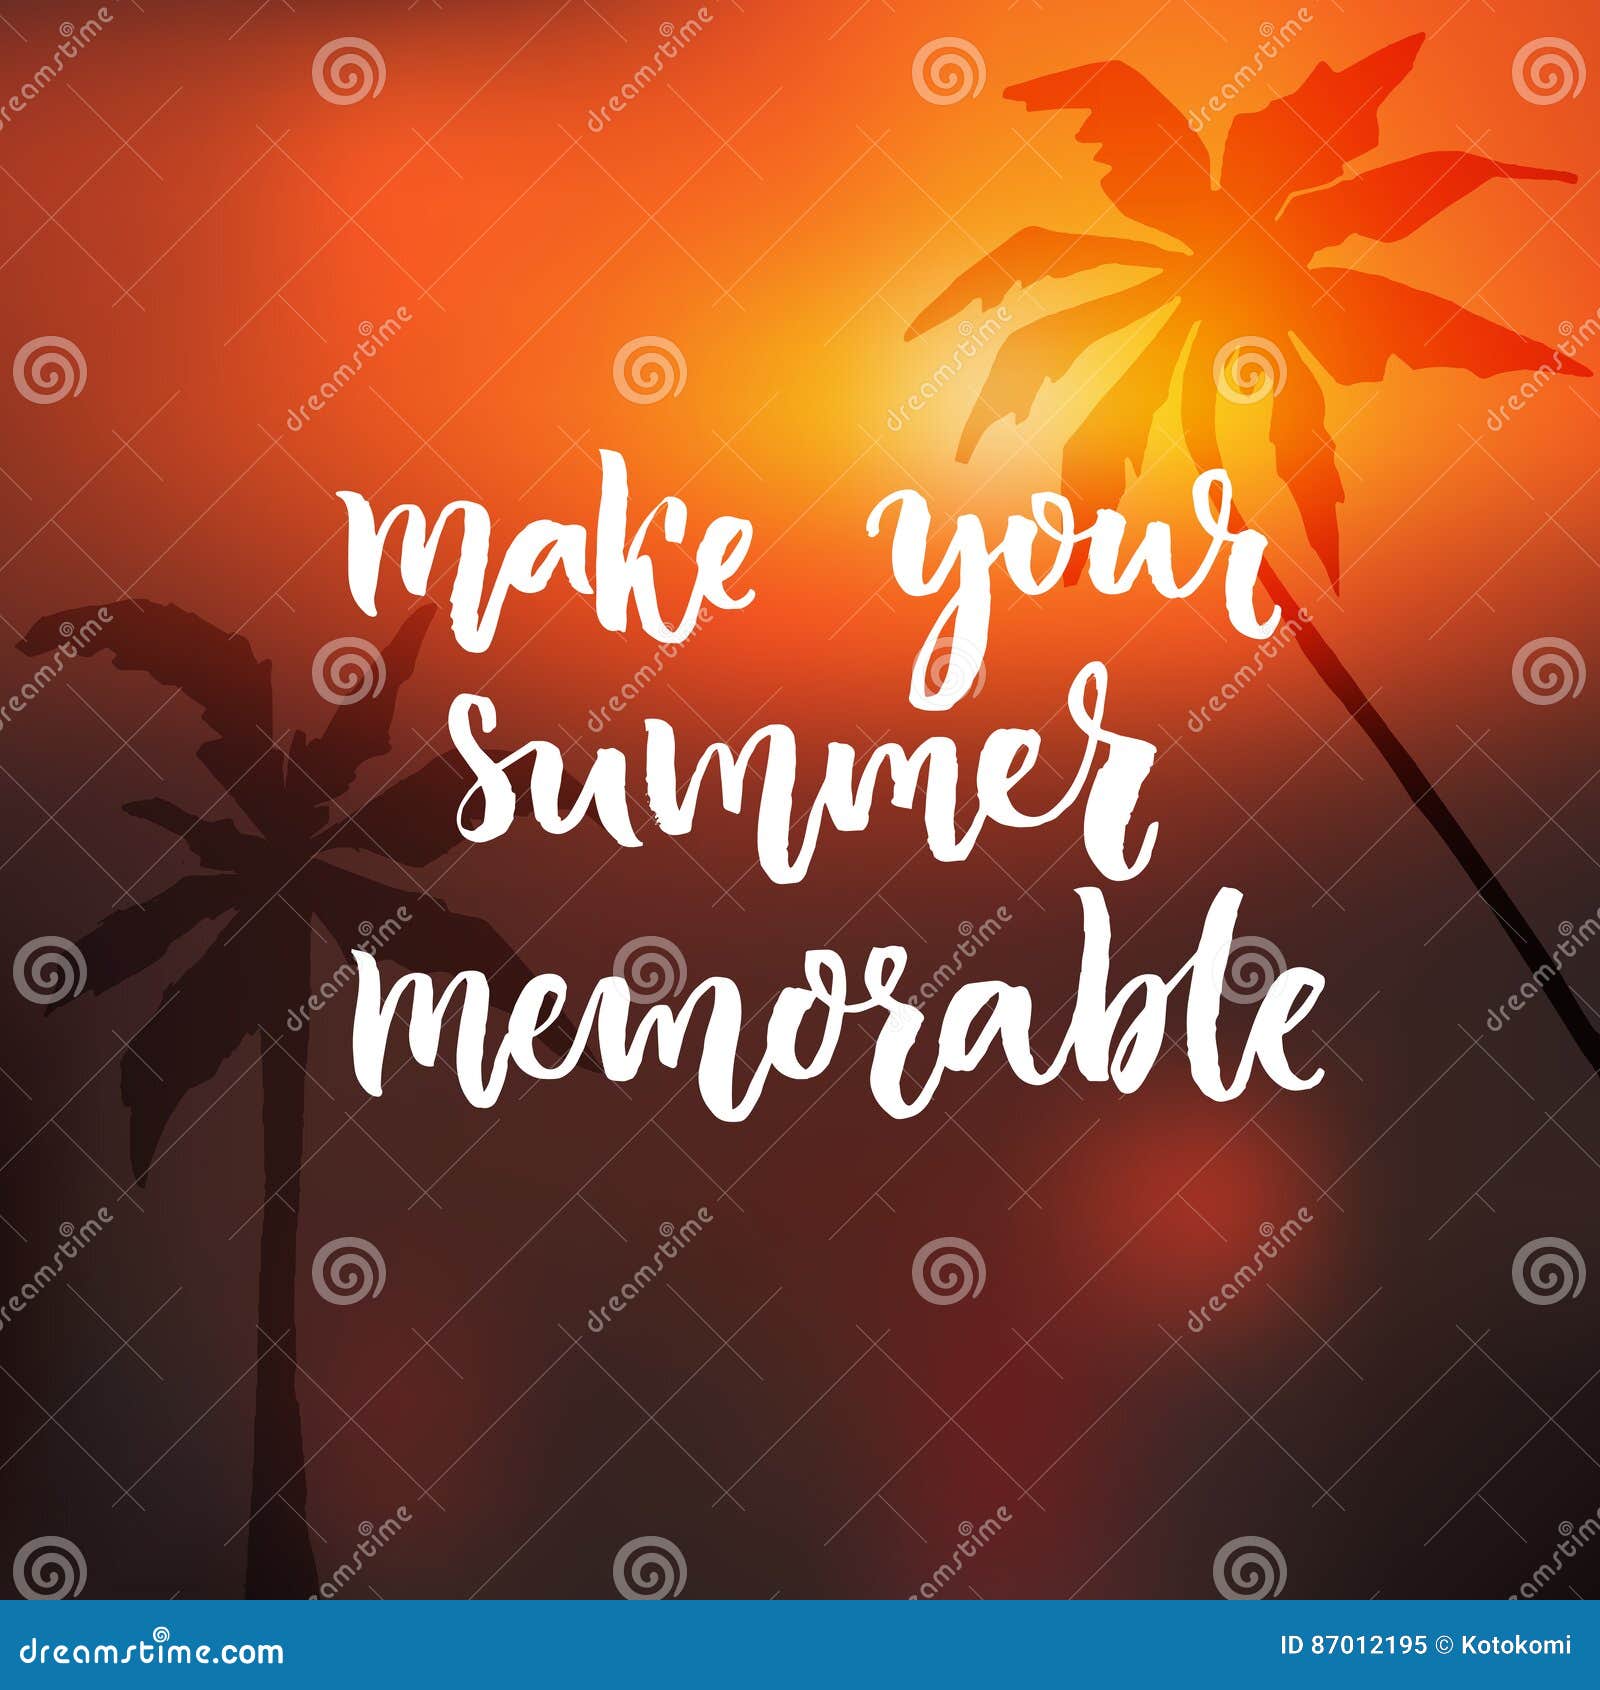 make your summer memorable. motivational quote st orange sunset background with palm trees silhouette